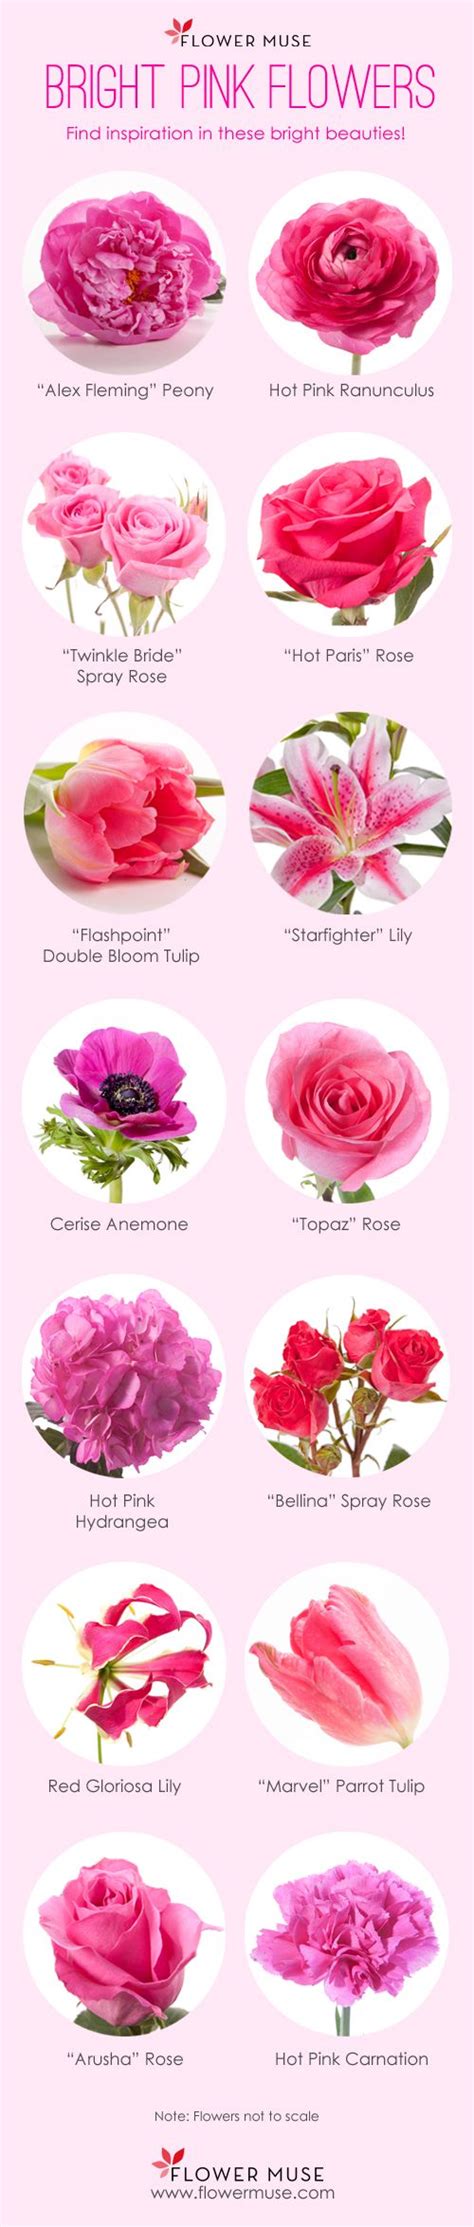 Our Favorite Bright Pink Flowers Flower Muse Blog Wedding Flowers Pink Roses Pink Wedding